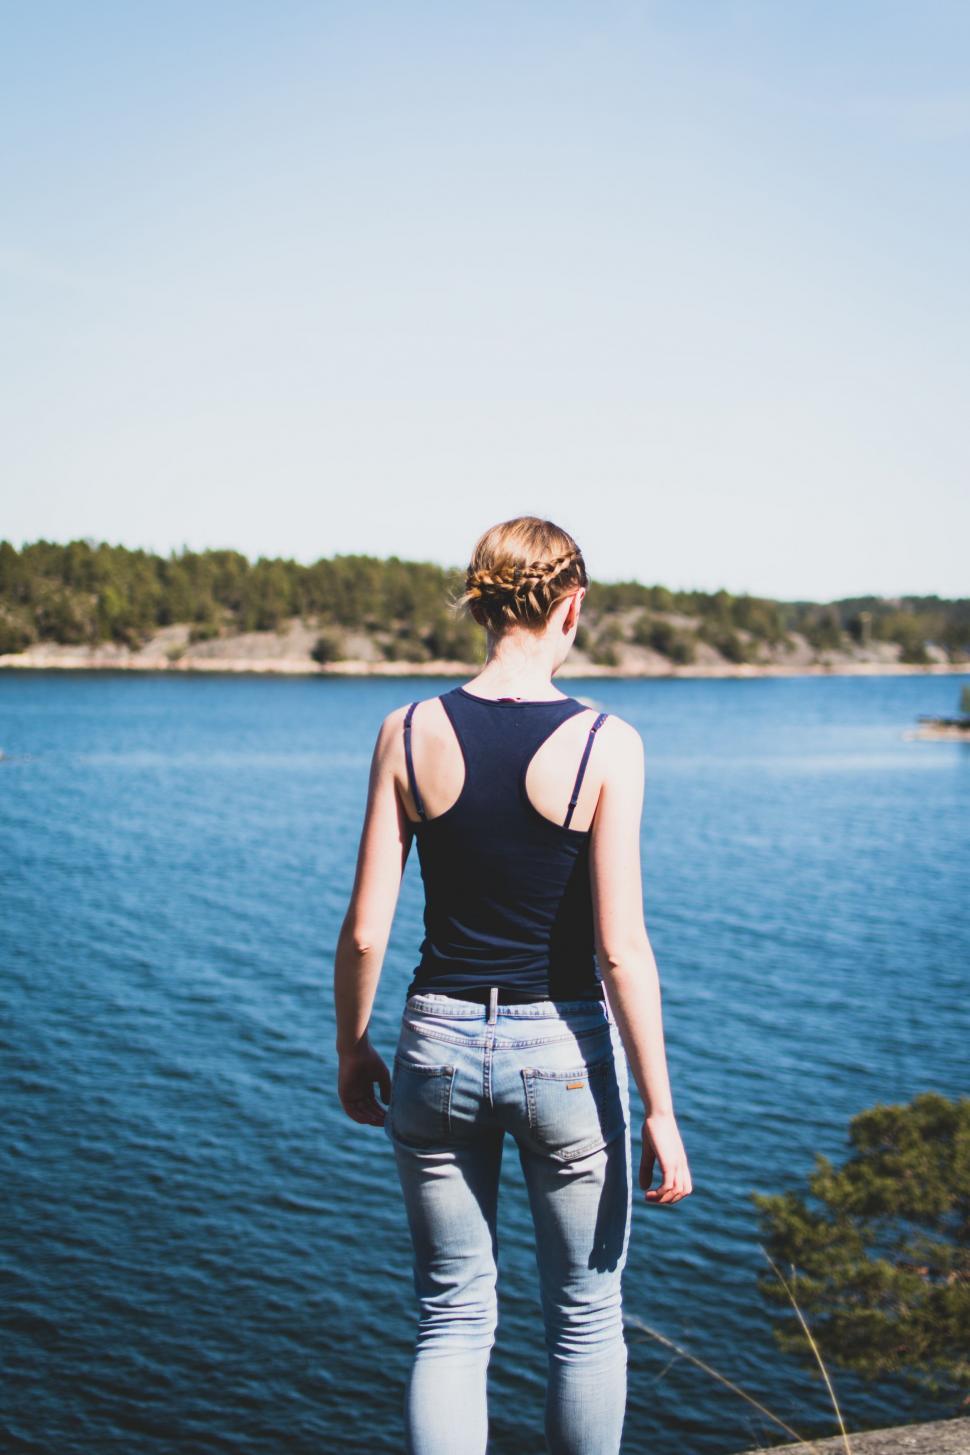 Free Image of Woman Standing on Cliff Edge Overlooking Water 